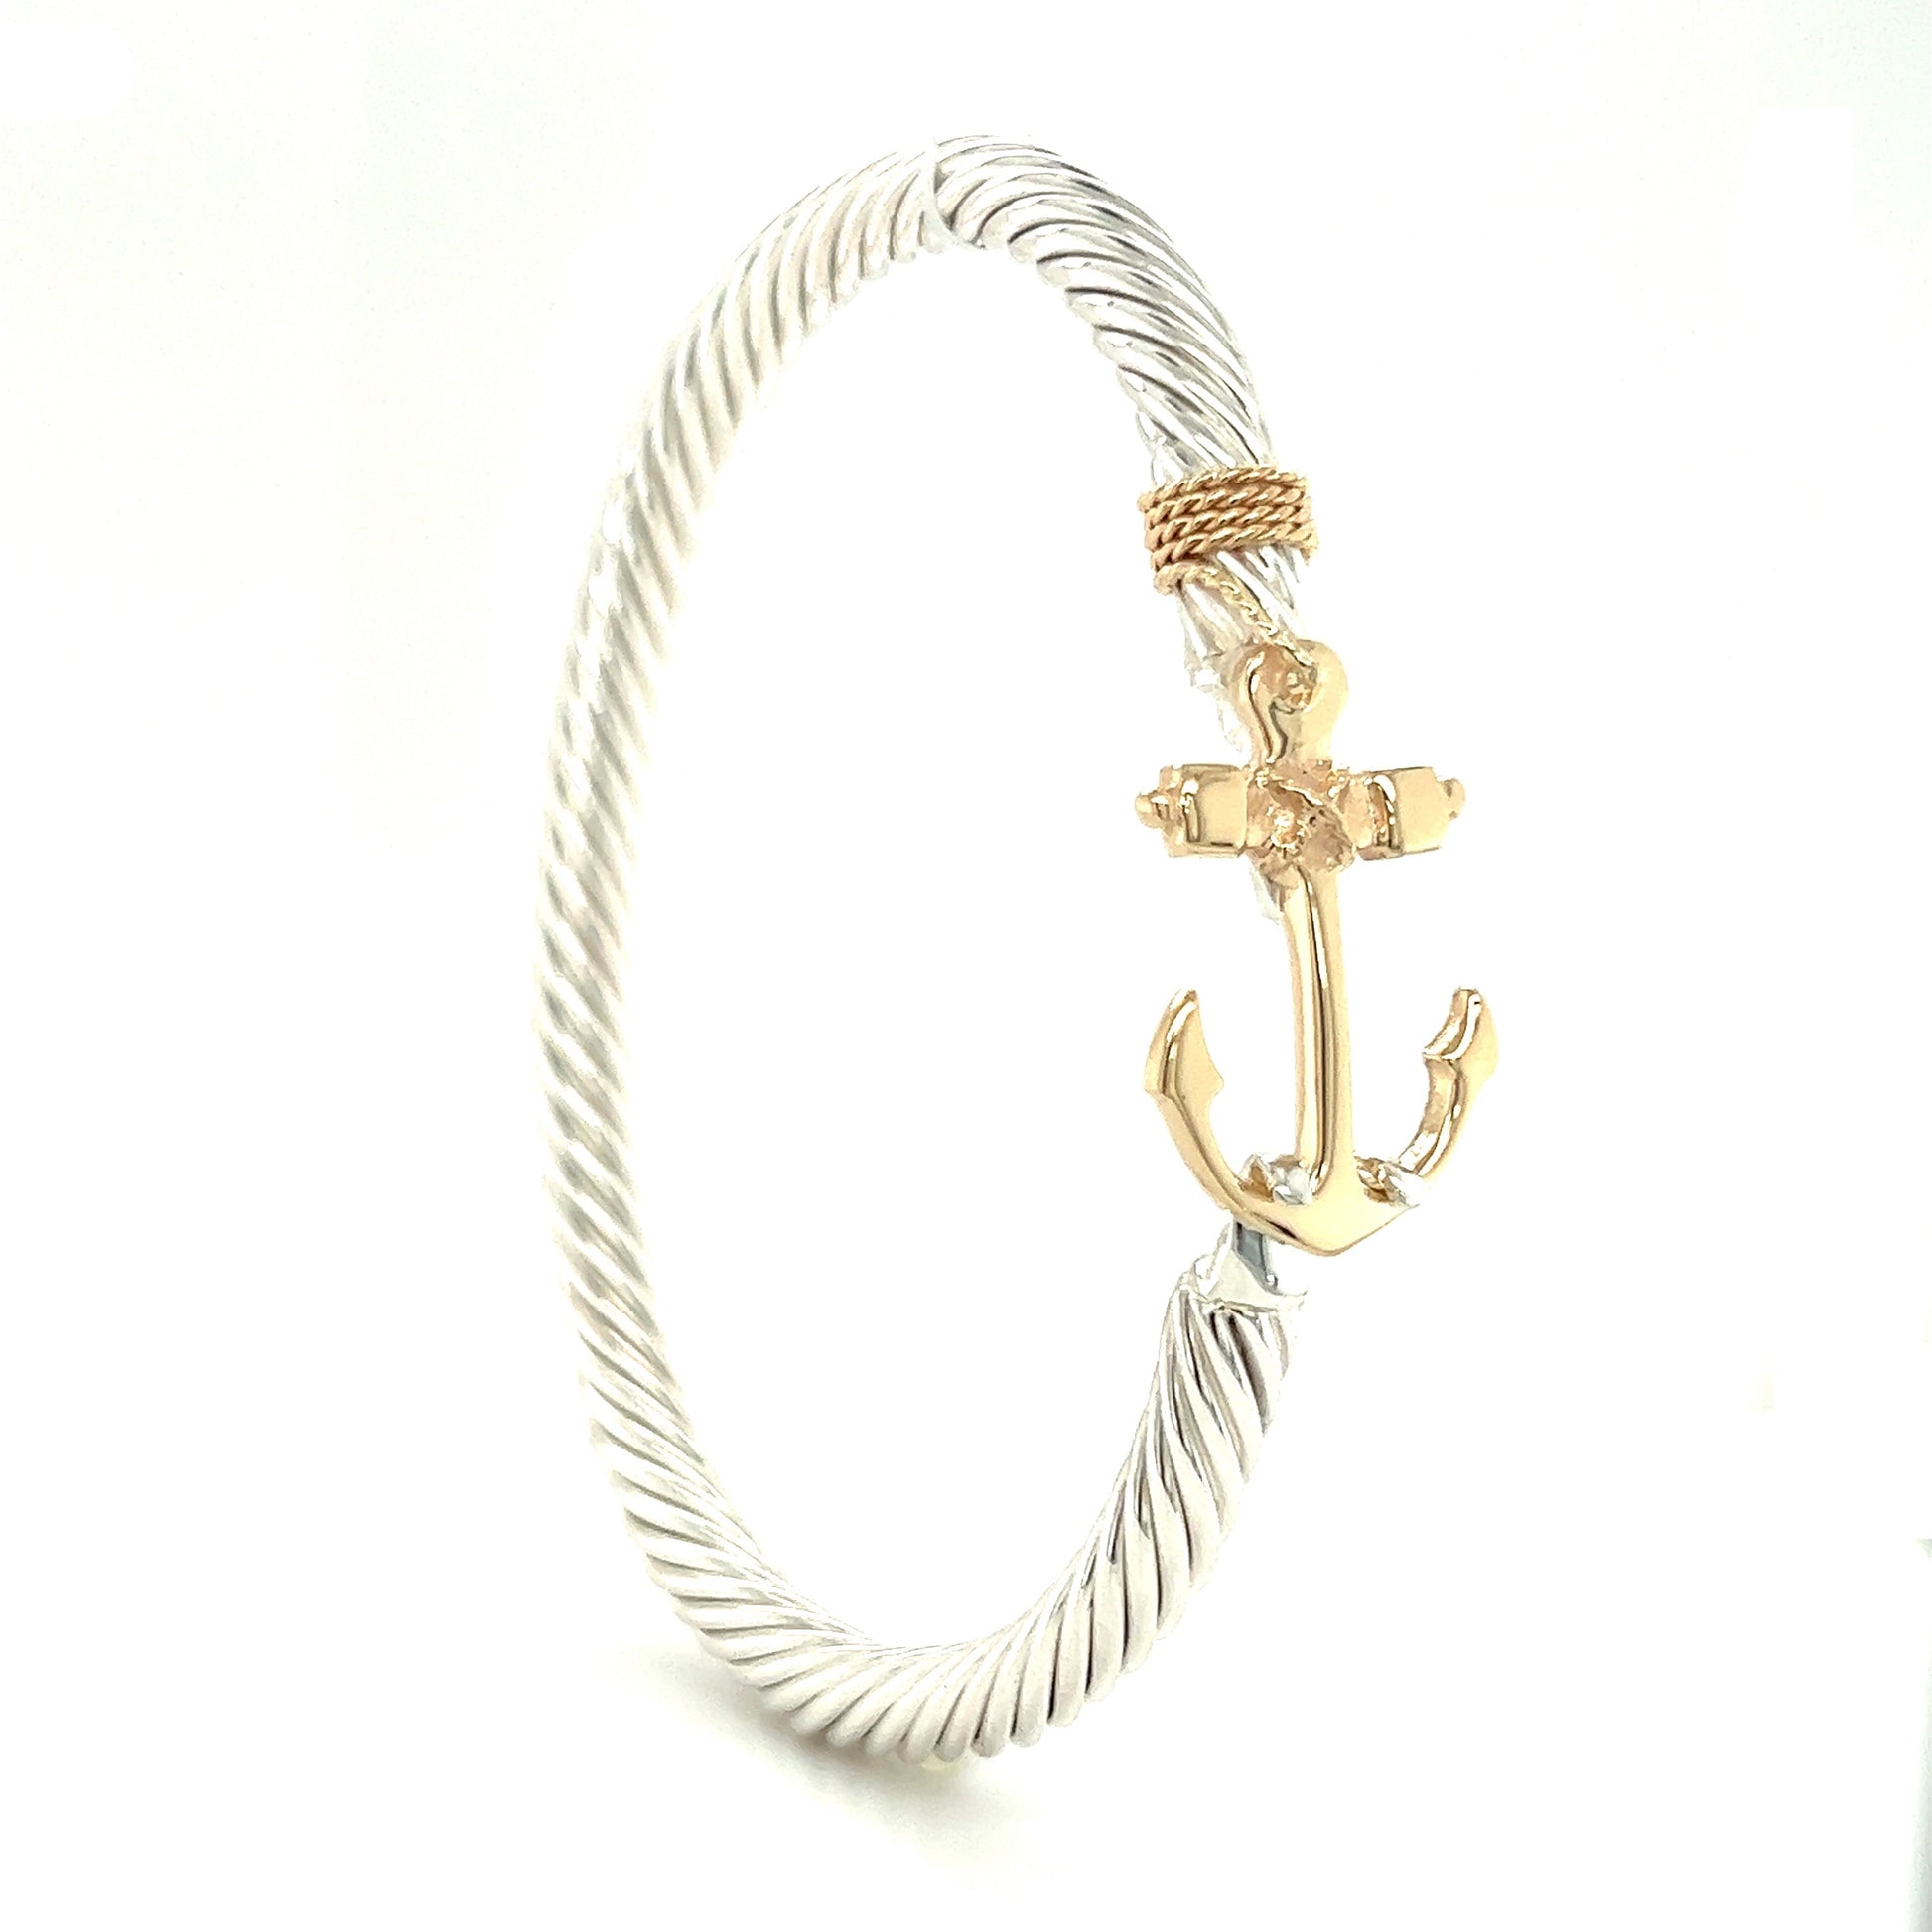 Twisted Cable 5mm Bangle Bracelet with 14K Yellow Gold Anchor and Wrap in Sterling Silver Side View